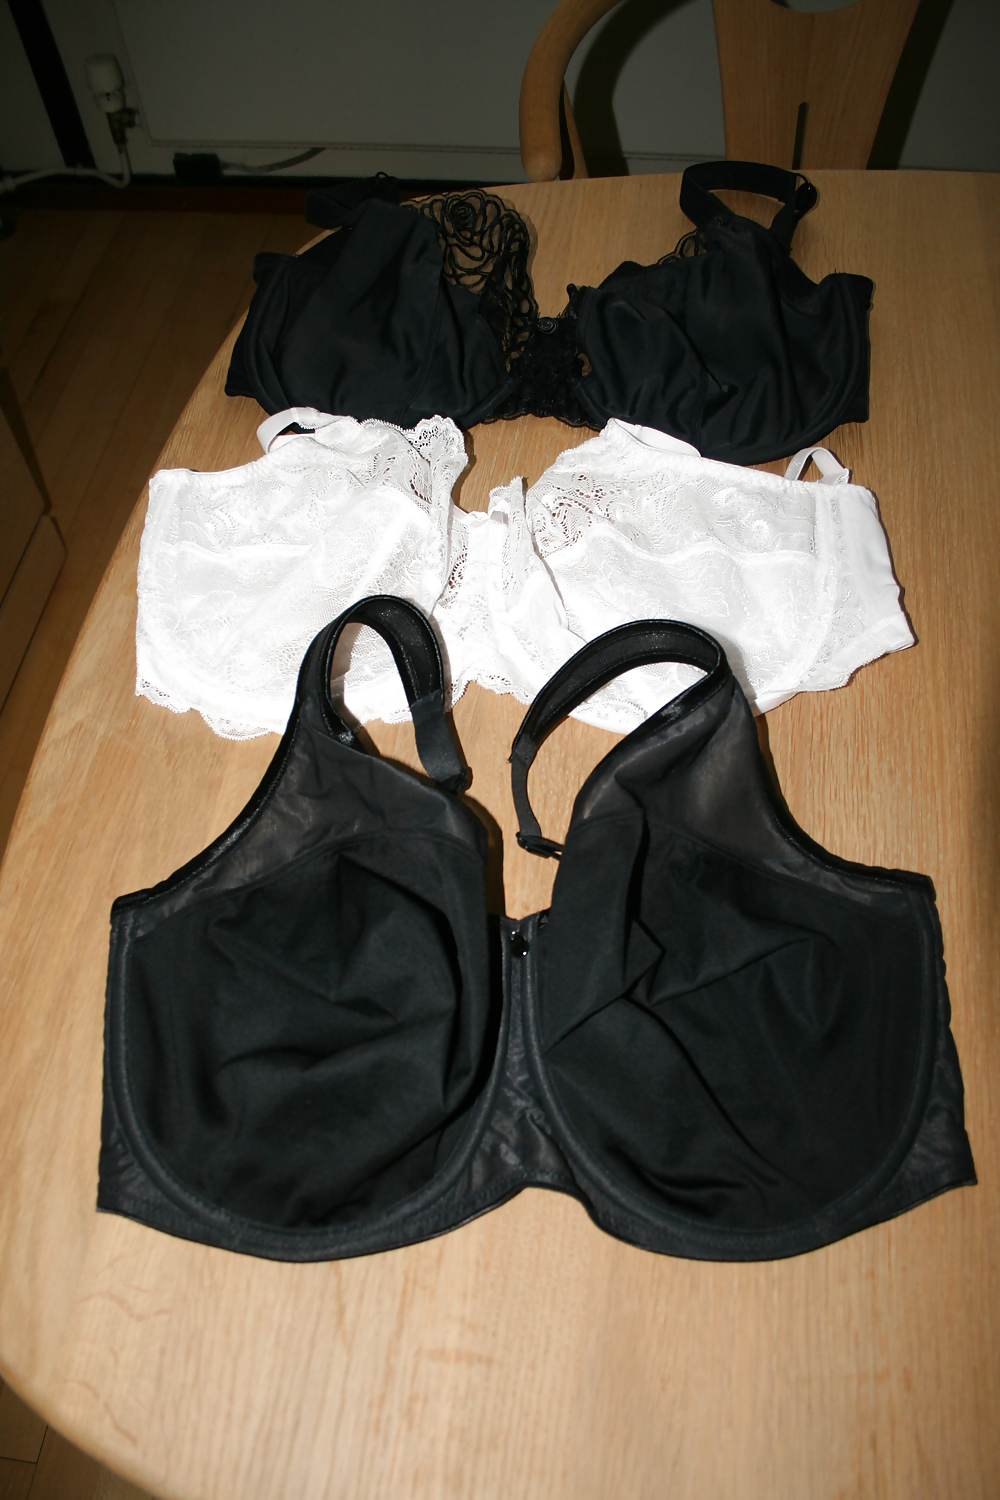 G cup bras and bigger #12082698